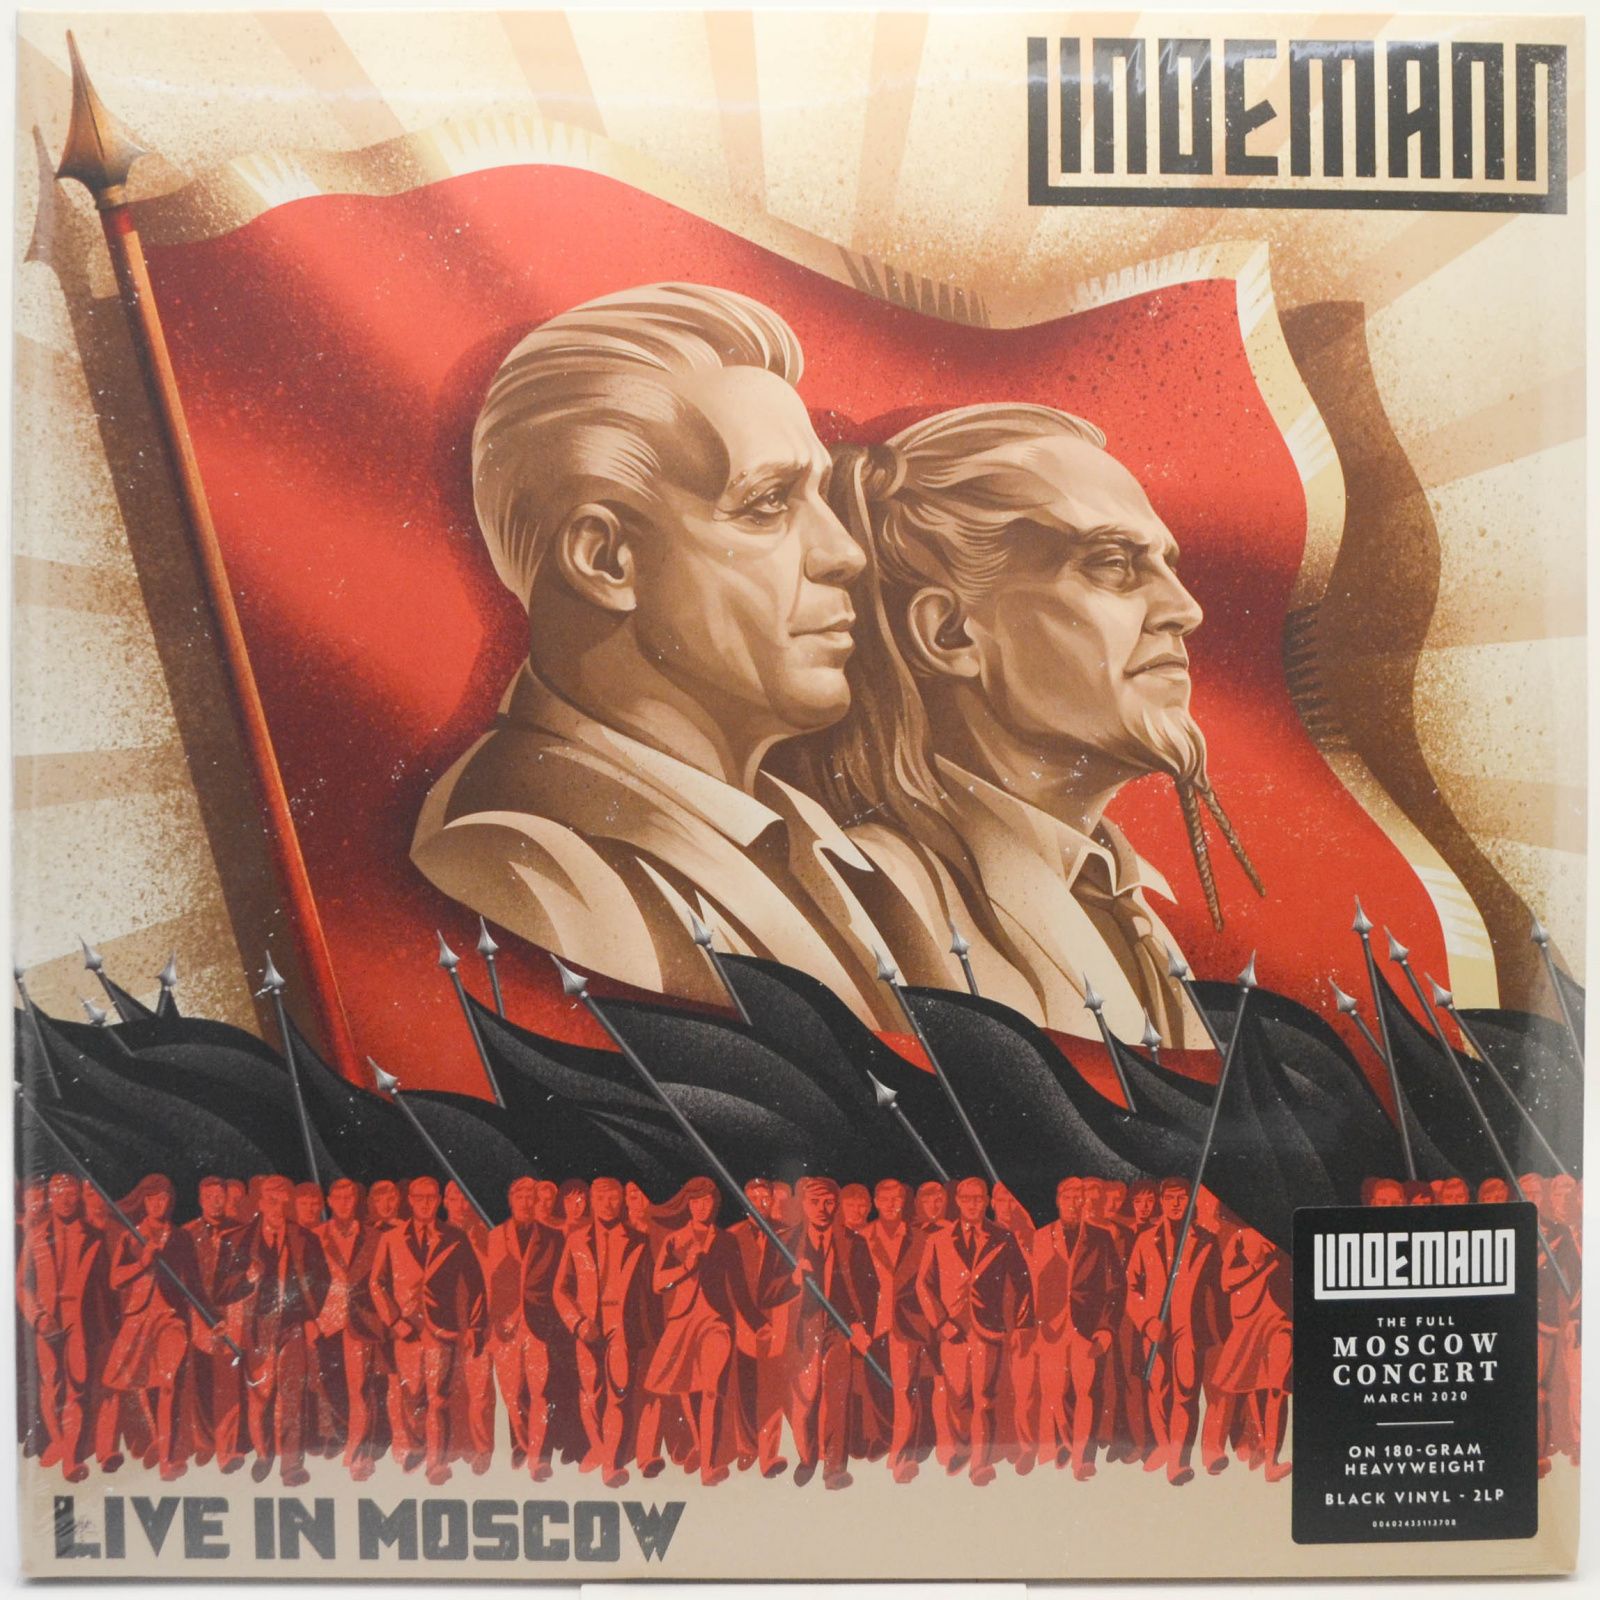 Lindemann — Live In Moscow (2LP), 2021